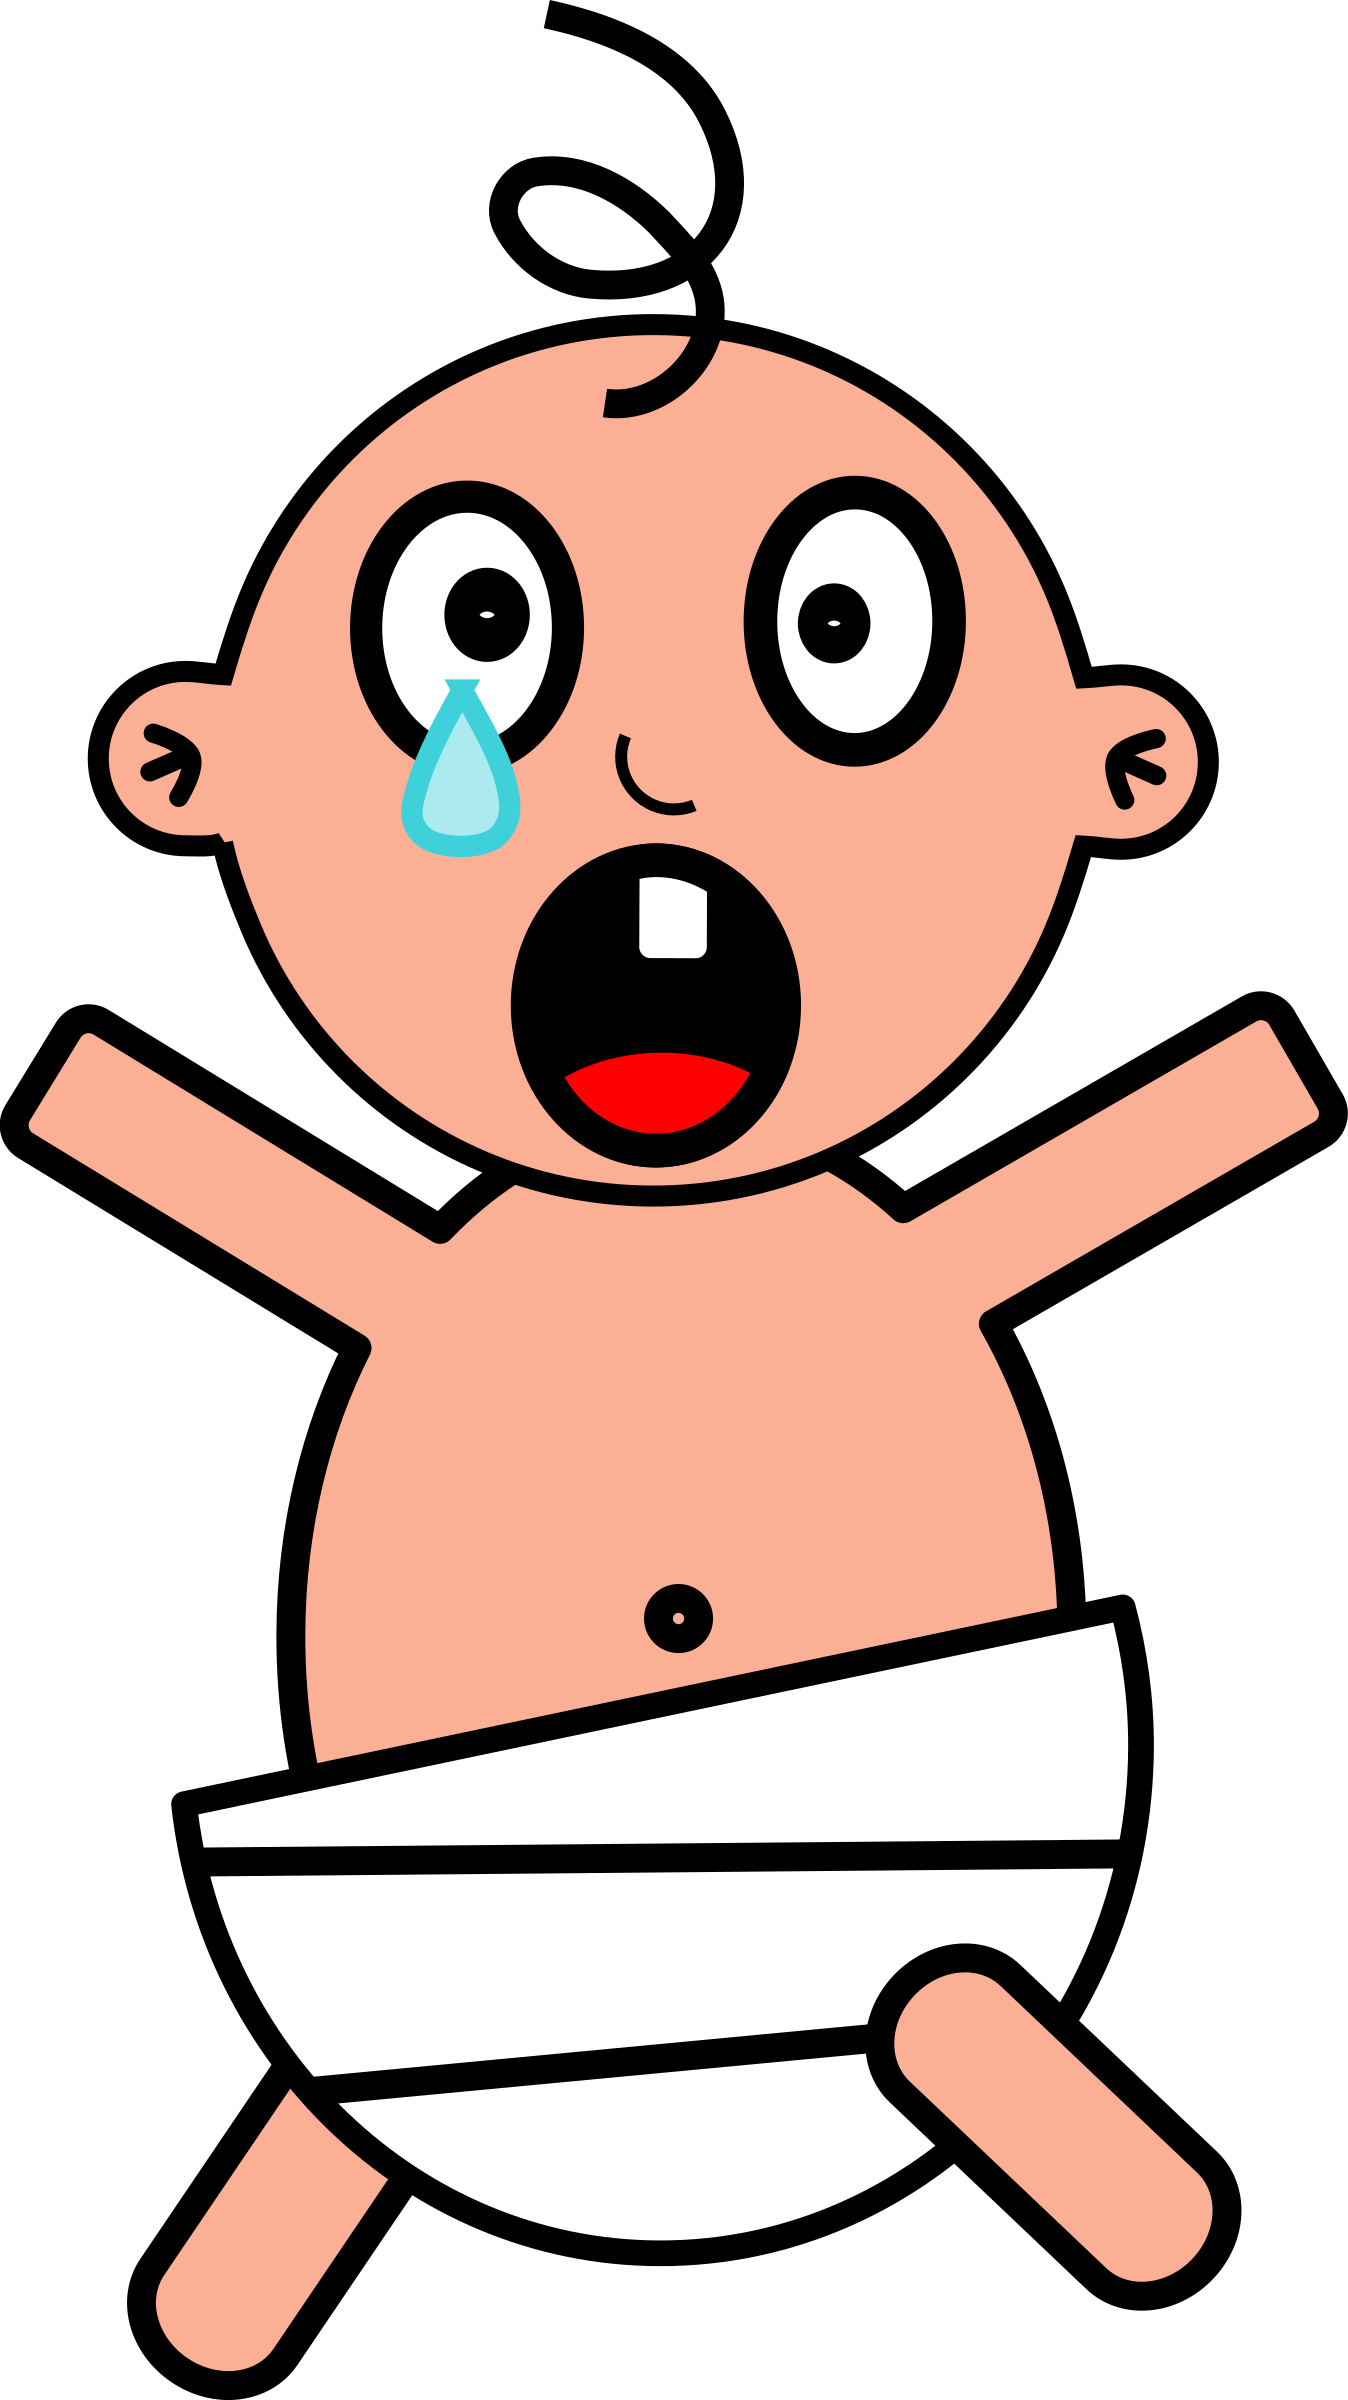 Cartoon Crying Baby - ClipArt Best - ClipArt Best - ClipArt Best